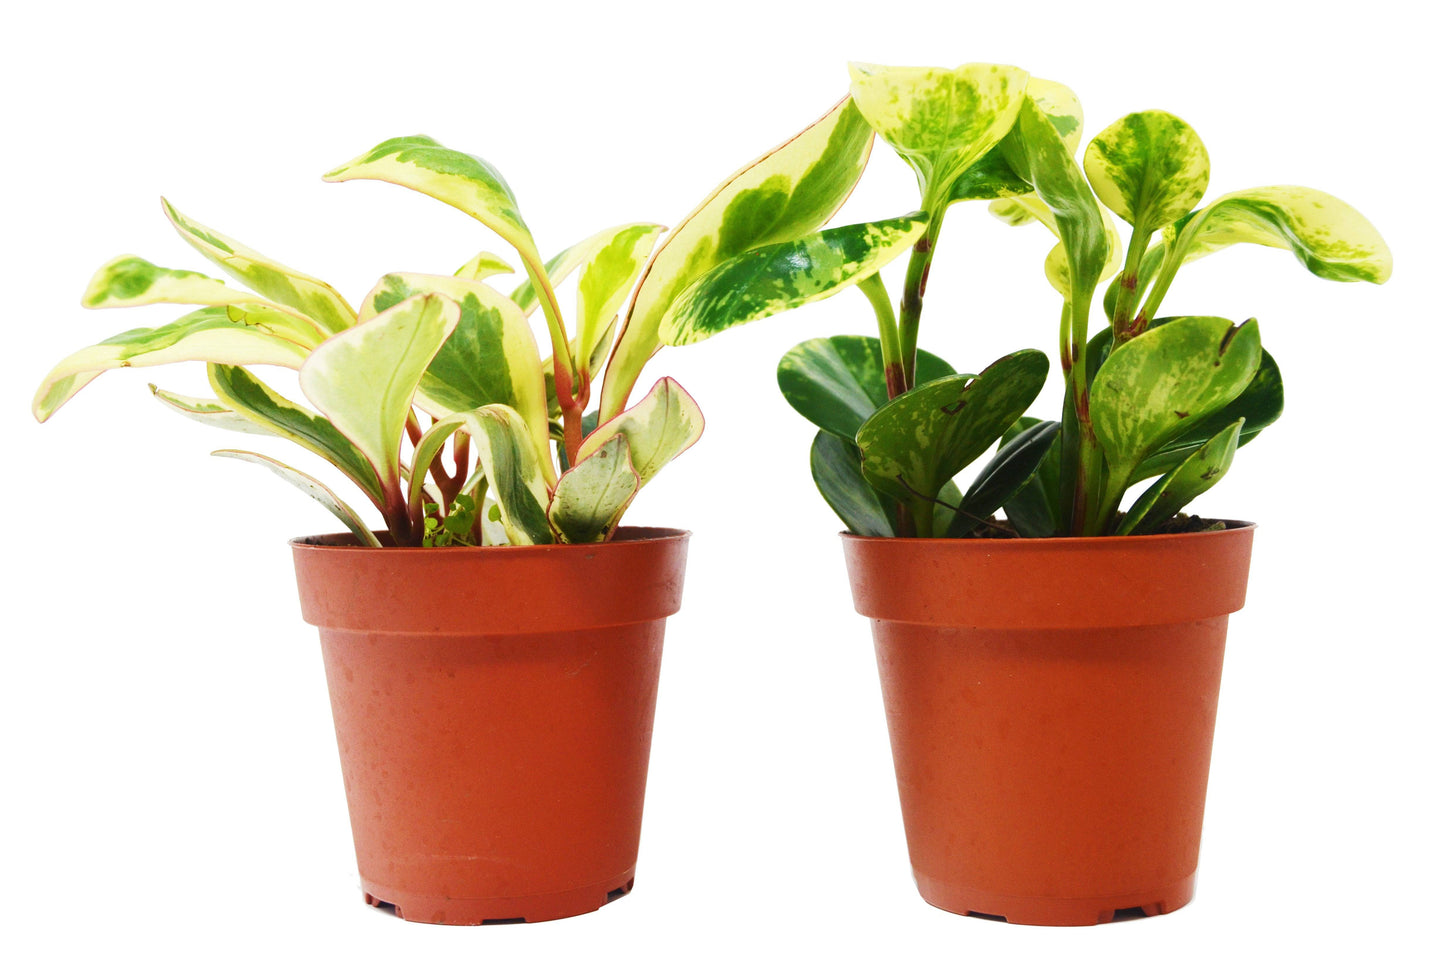 2 Peperomia Plants Variety Pack in 4" Pots - Baby Rubber Plants - Plantonio